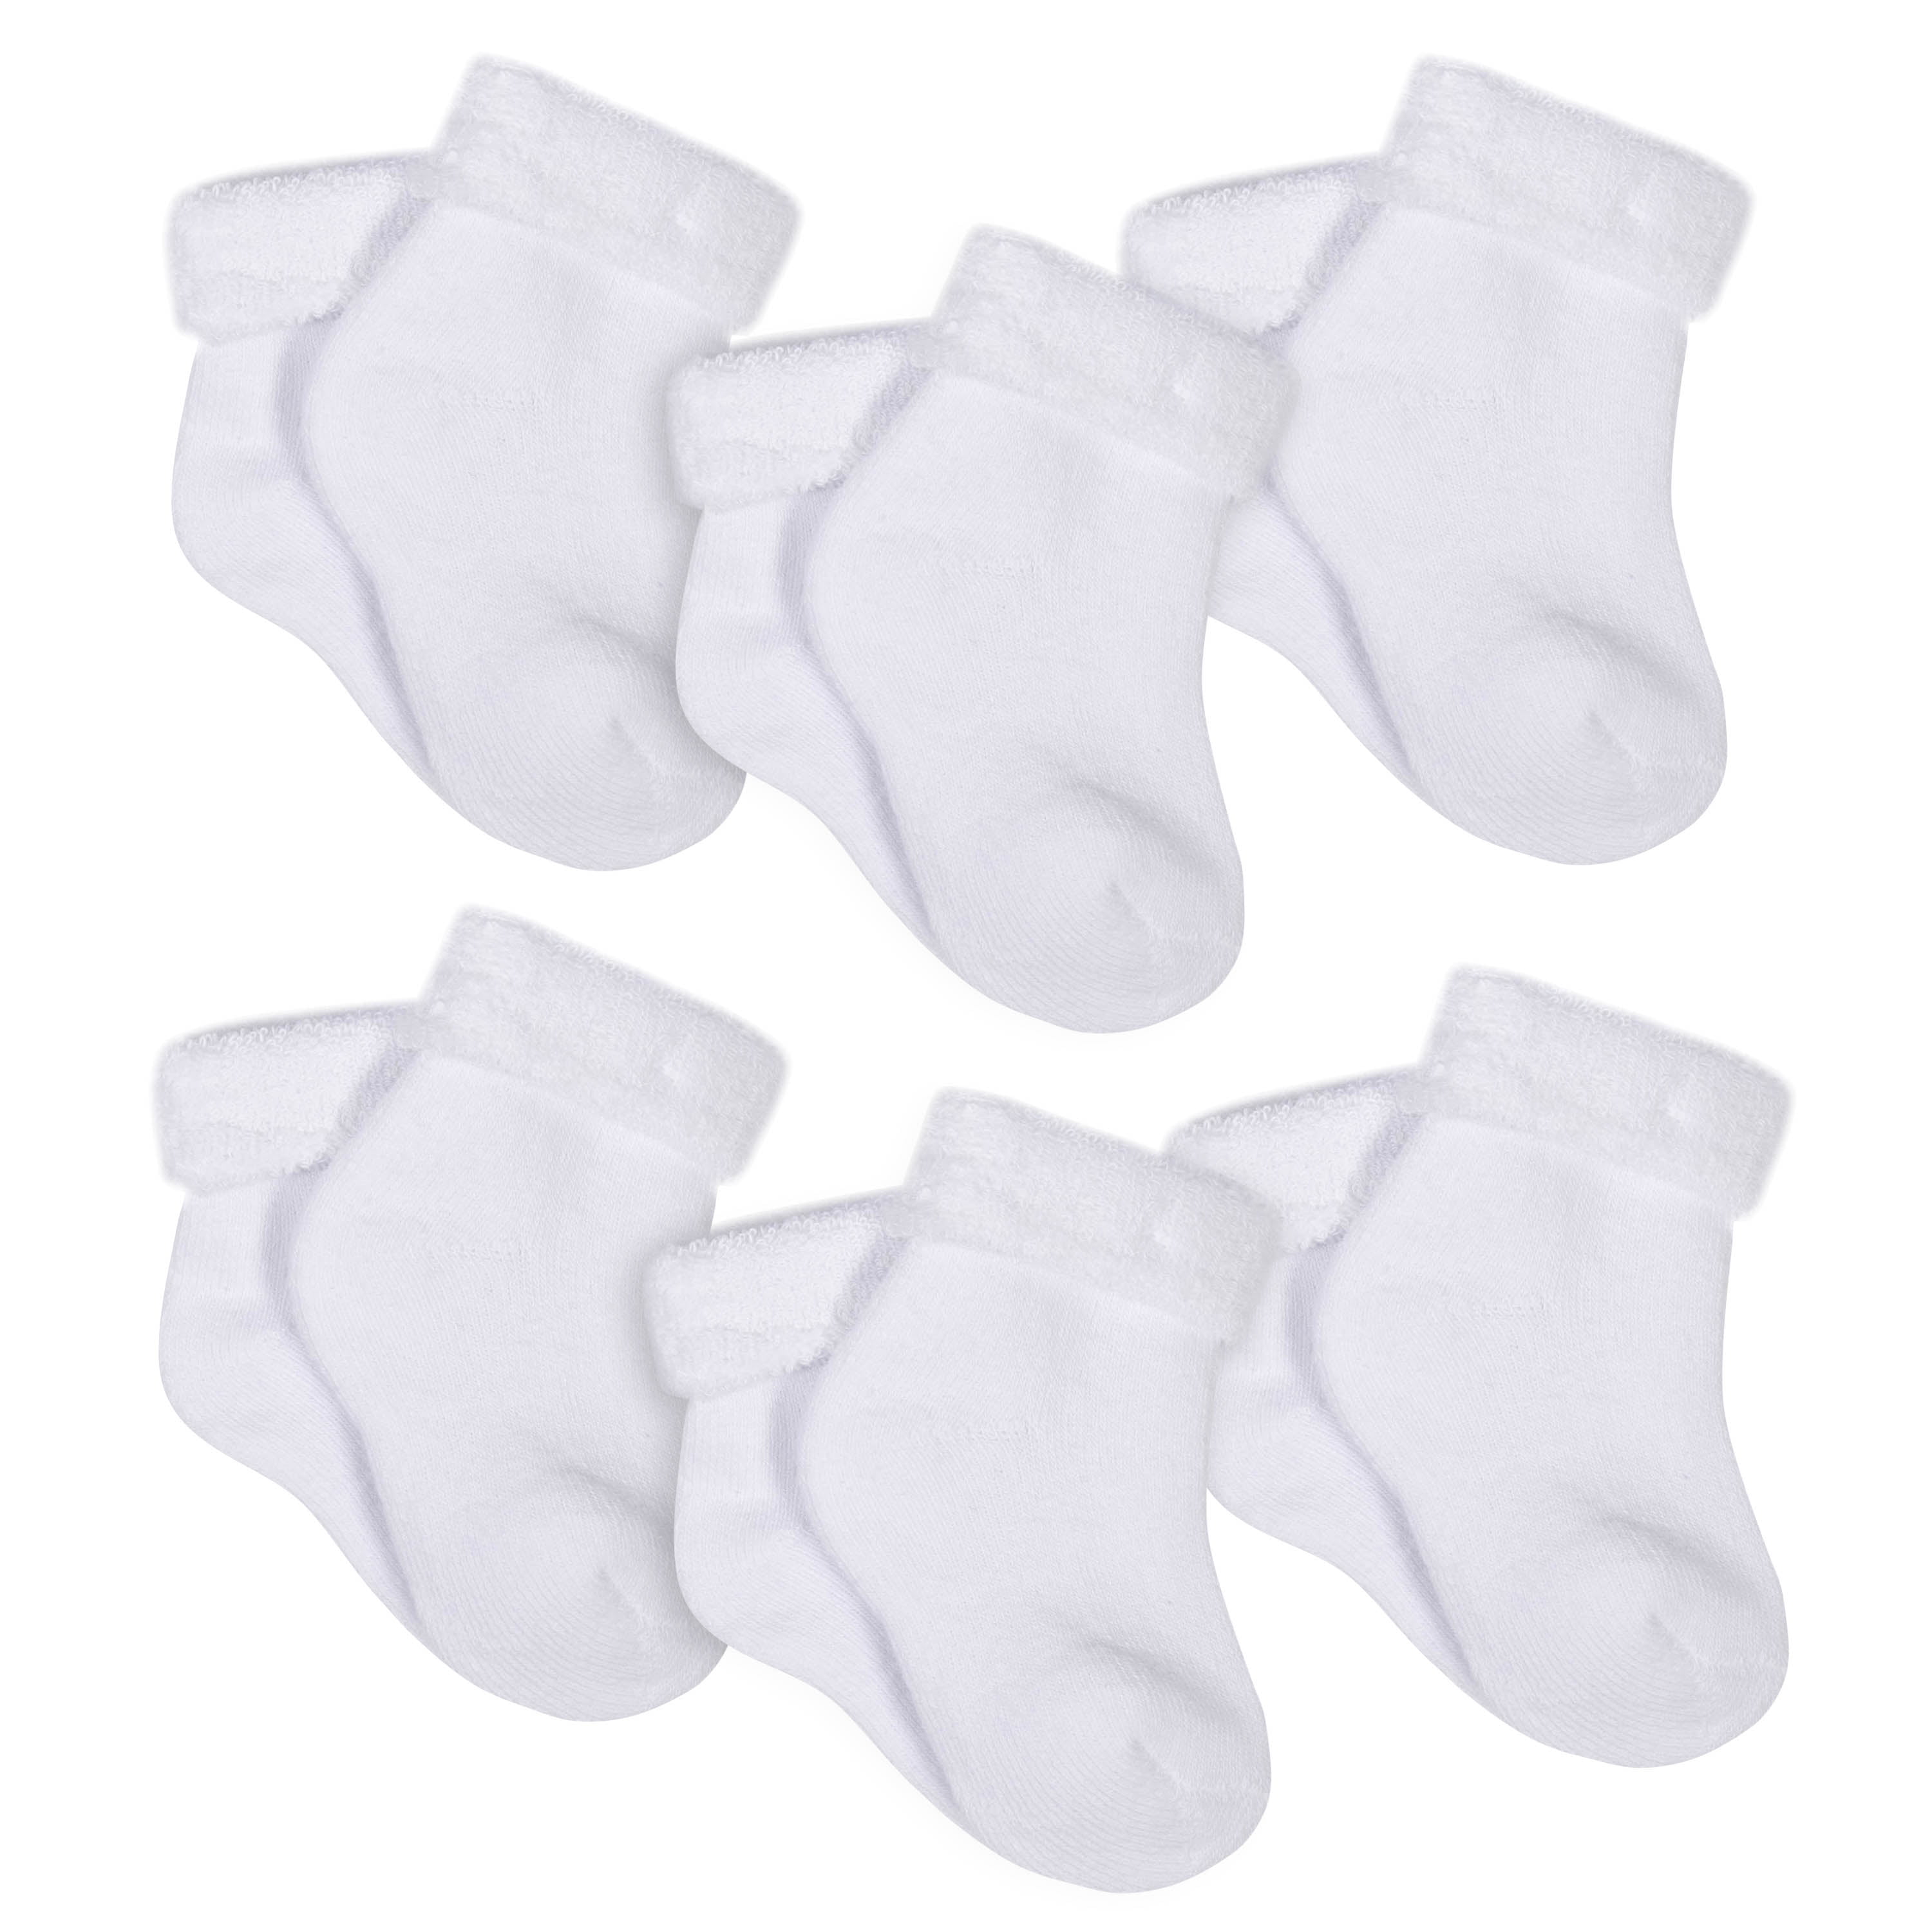 Boys Awesome Page Boy Black Socks Wedding Socks Available in Infant Junior 6-9 